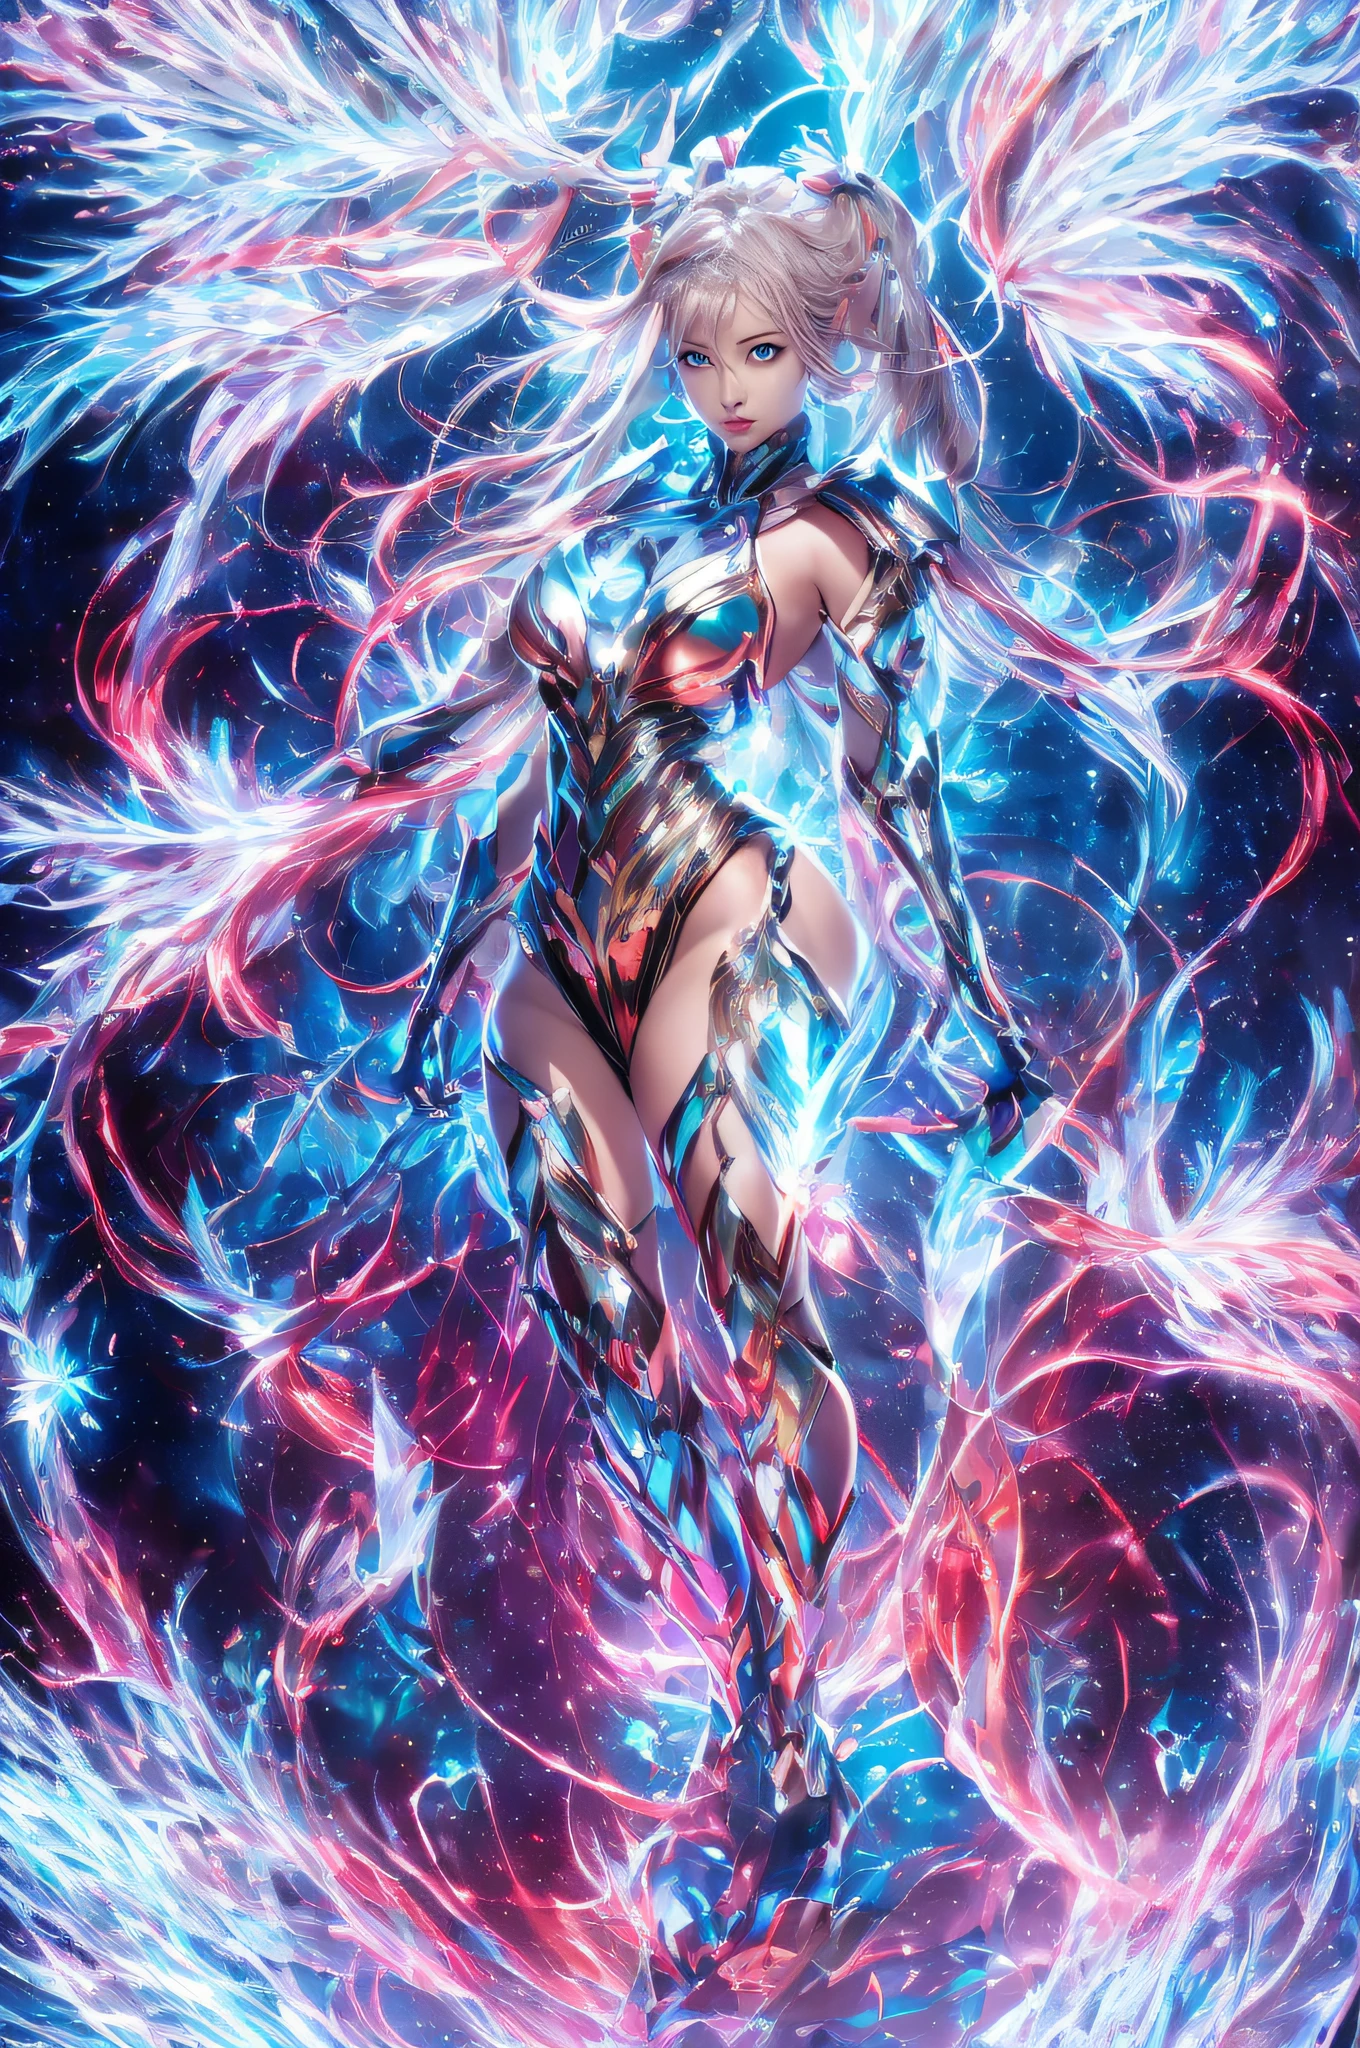 ((Top Quality, 16k, Masterpiece: 1.3)), photorealistic, extremely detailed CG unity 8k wallpaper, Depth of field, Cinematic Light, Lens Flare, fashion model 28 years old, (extremely beautiful face, beautiful lips, beautiful eyes), (intricate detail face), ((ultra detailed skin)), I see Ultra Instinct surrounded by a purple aura and lightning (((full body shot))), 4k, 3D, Draw moving ice flames, [[chest]], neck, [[bodysuit lacy lace-upp]], (Intricate detailed multi-layer bodysuit lacy lace-upp), [shoulders], (((looking at viewer:1.8))), all feet and breasts shod in armor of silver glass, and cristals (corset), low braided long ((red hair)), 1Girl (big bust:1.5), ((narrow waist, slanderous legs)), perfect proportions, perky , (glaring ice eyes:1.1), The drawn enchanted fantasy land is frosty, with flying pieces of ice floating in the air and glowing energy crystals. this environment in the mist and magical vortex of thousands of ambient light elements, light reflections, including the environment (ice and crystals) glowing in the air. The girl's armor is made of silver glass, (oli face: 1.3), (snowflakes:1.5), ray tracing, (sparkle:1.5), UHD, (shiny:1.5), (light reflections:1.6), (crisp:1.7), Fujicolor, cinematic lighting, ((grayscale))